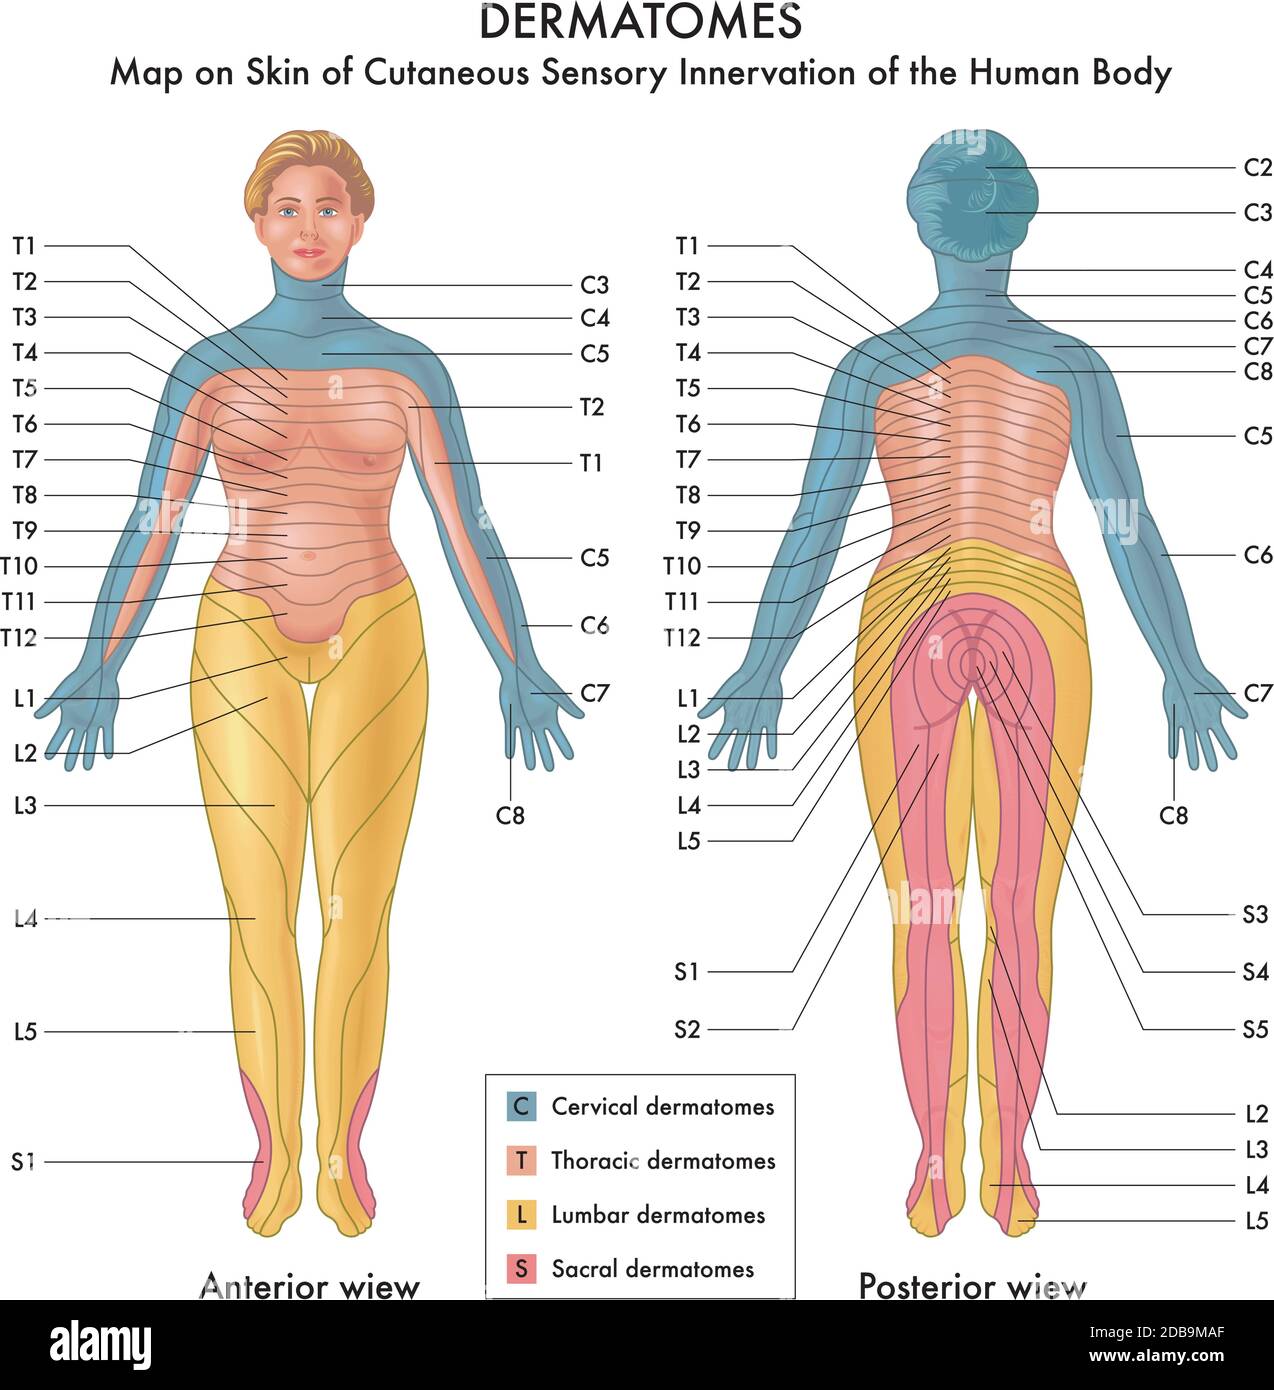 Map on Skin of Cutaneous Sensory Innervation of the Human Body Stock Vector